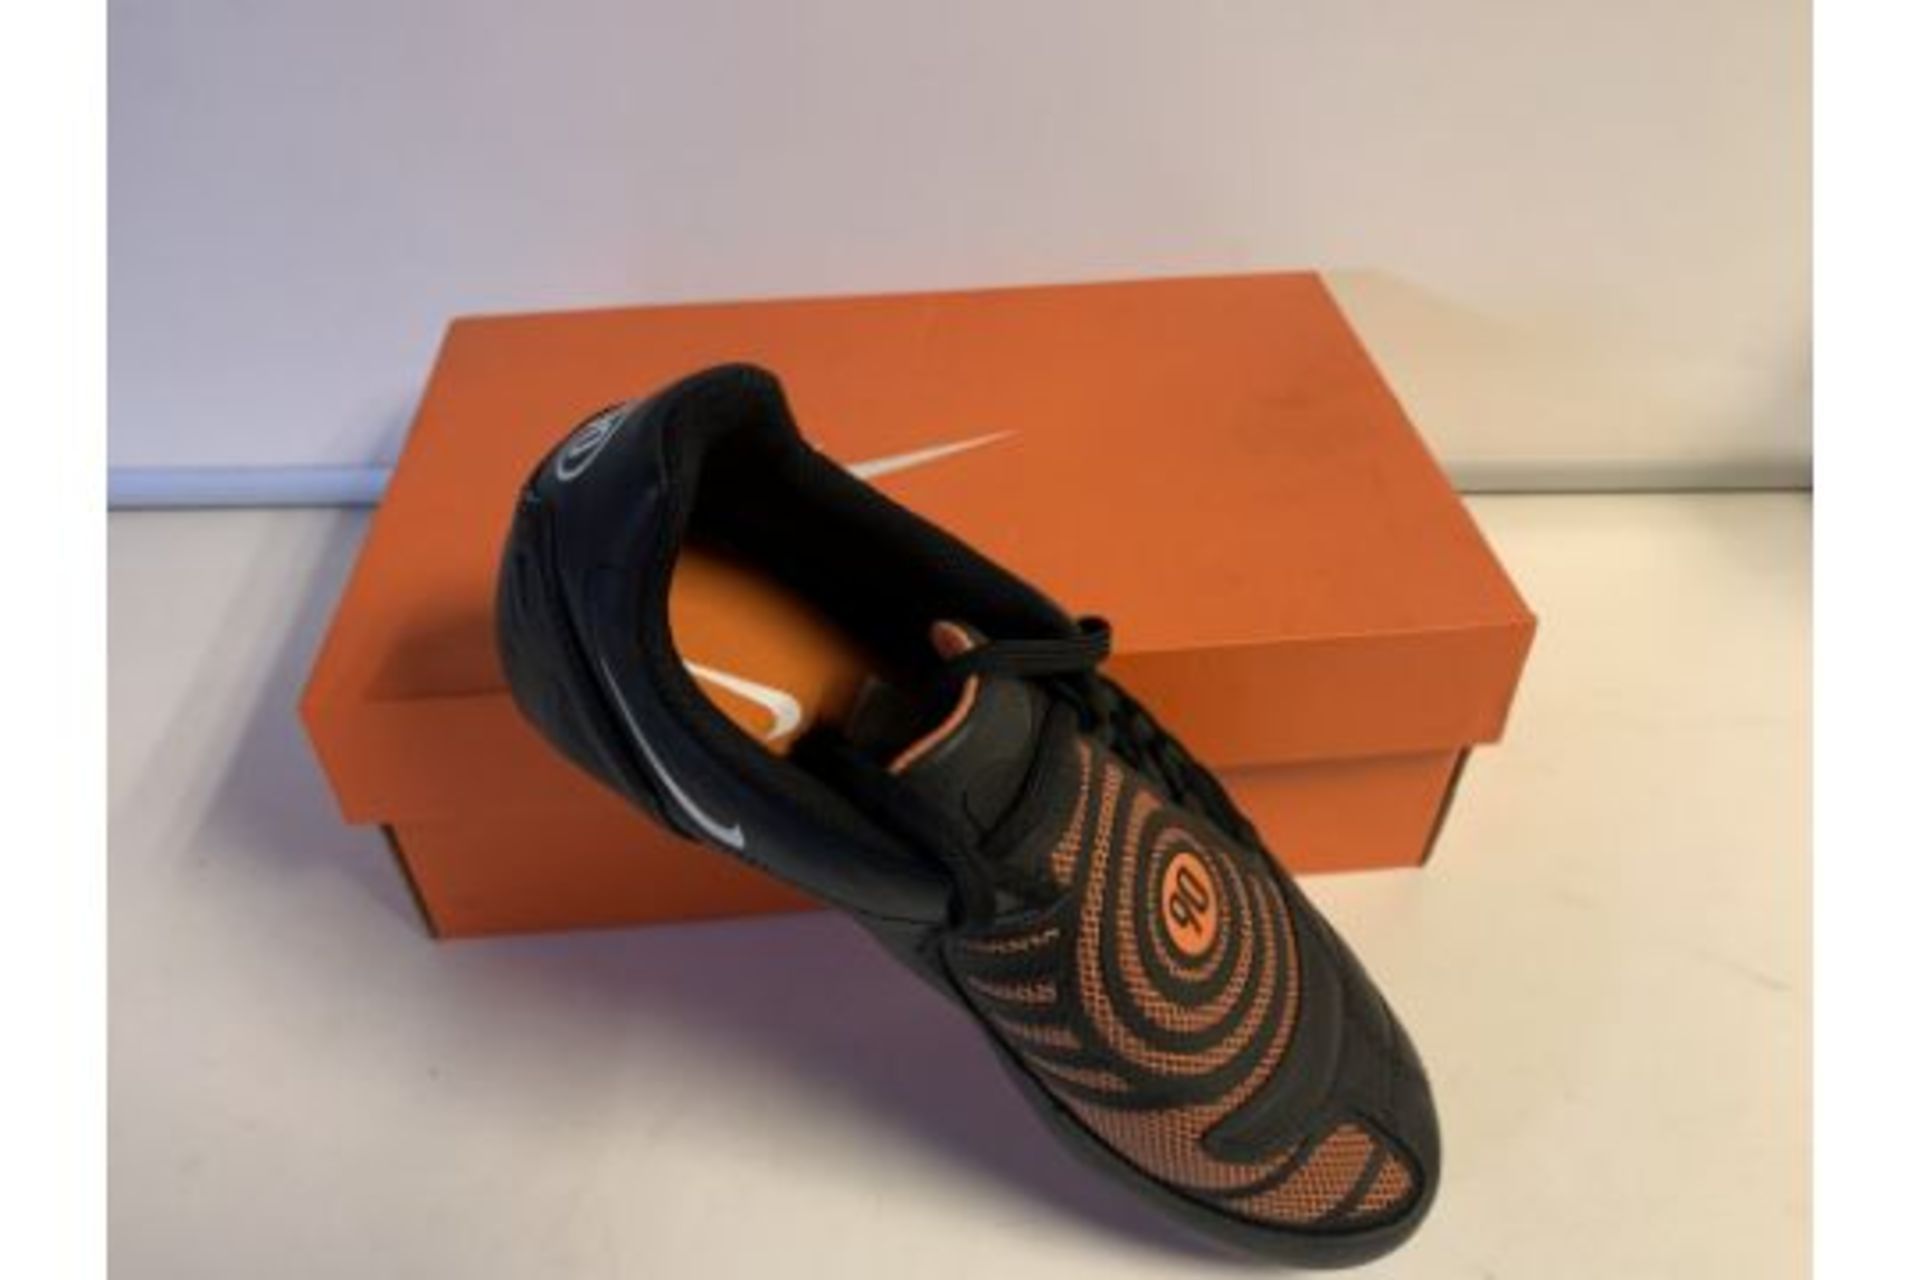 (NO VAT) 3 X BRAND NEW RETAIL BOXED NIKE JR TOTAL 90 SHOOT 2 EXTRA SG FOOTBALL BOOTS SIZE 4 (870/